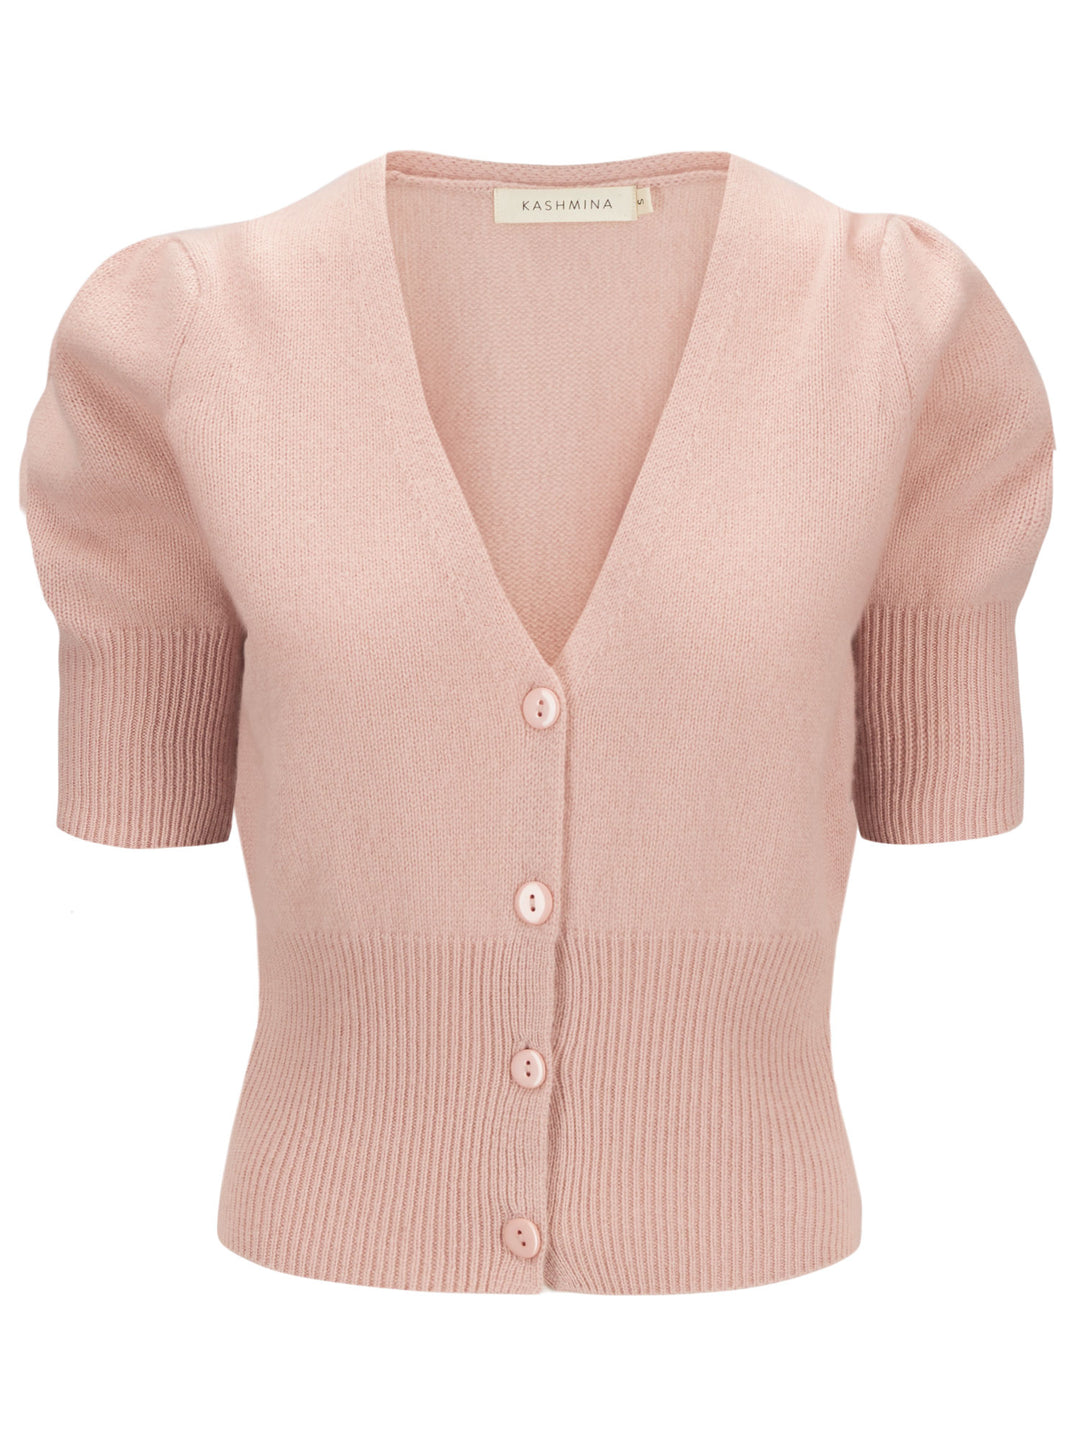 Cashmere cardigan puff sleeves, short sleeves, 100% pure cashmere, Scandinavian design, color: rose glow